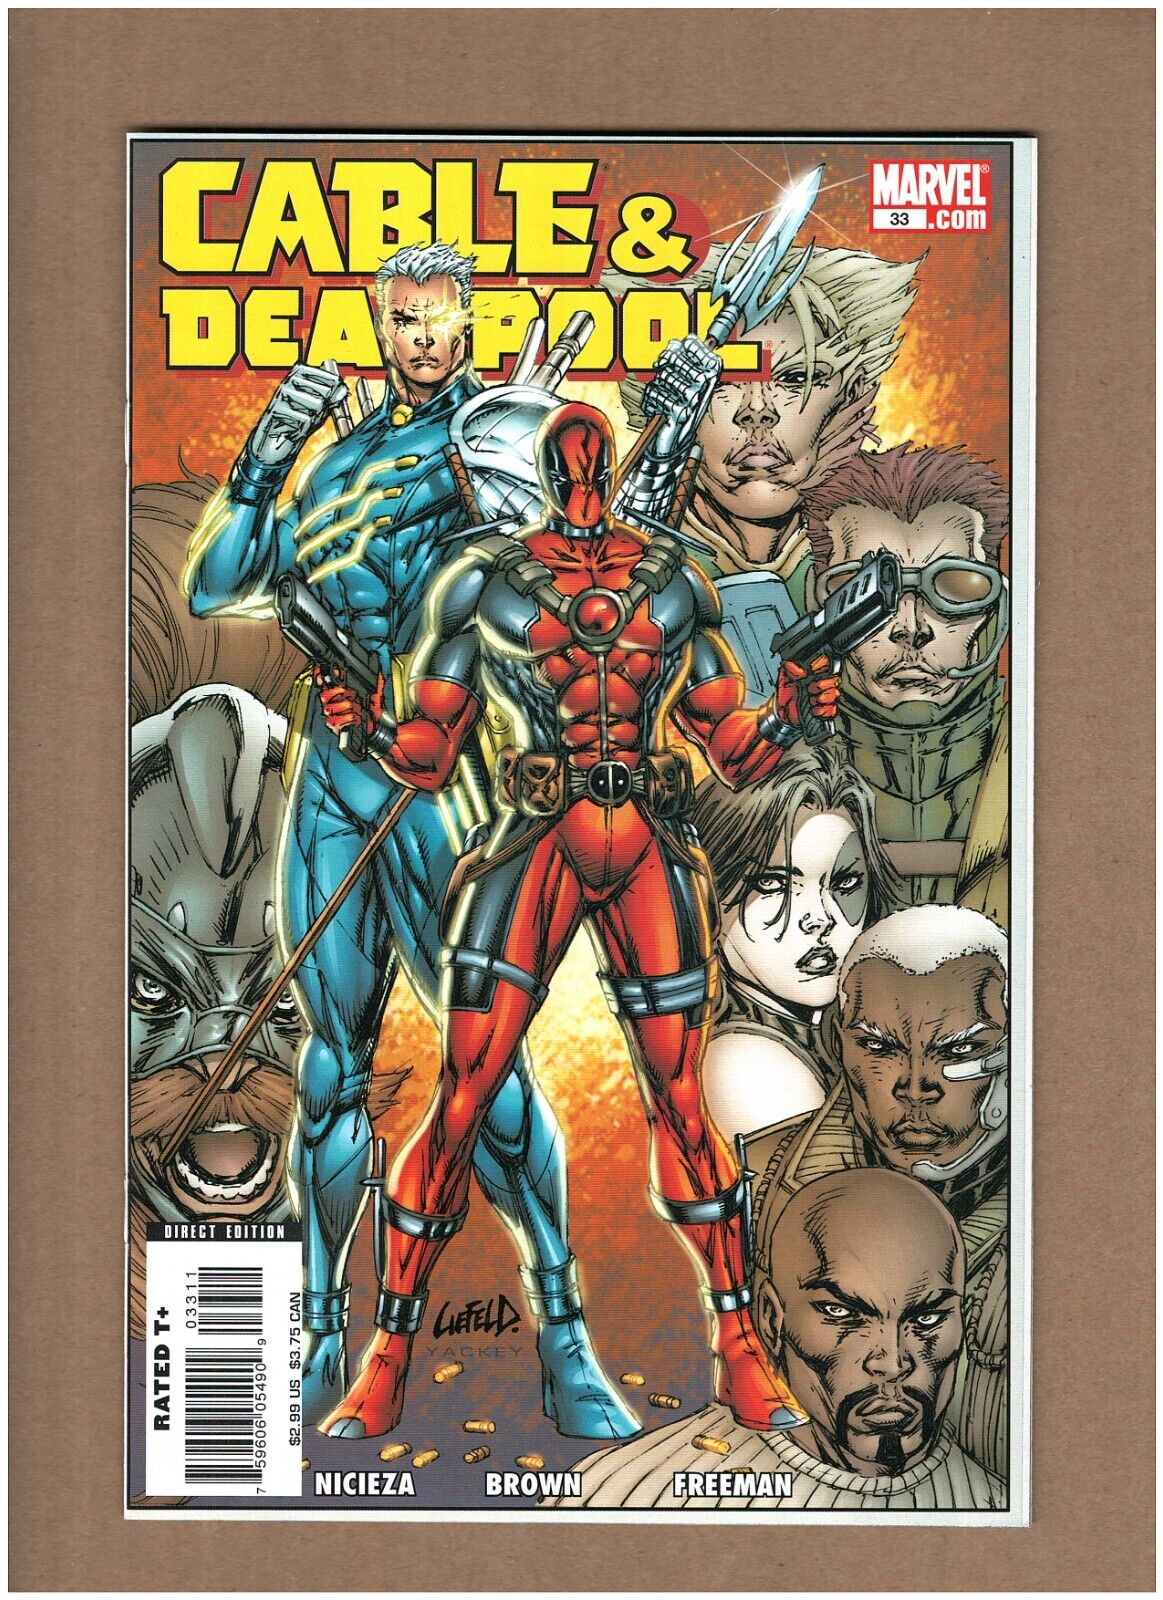 Cable & Deadpool #33 Marvel Comics 2006 Rob Liefeld Cover NM- 9.2